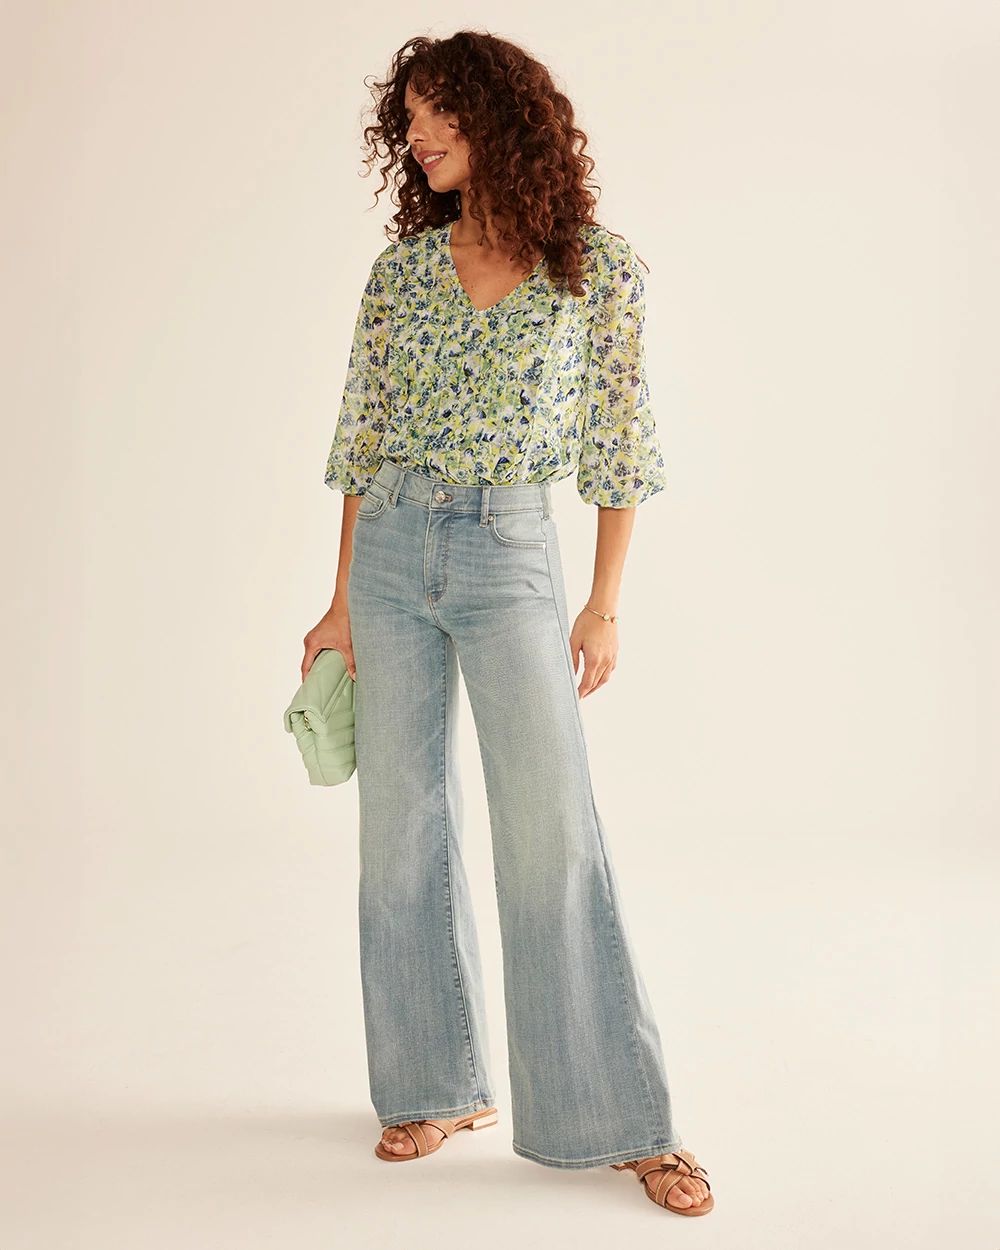 High-Rise Everyday Soft Denim  Wide-Leg Jeans click to view larger image.